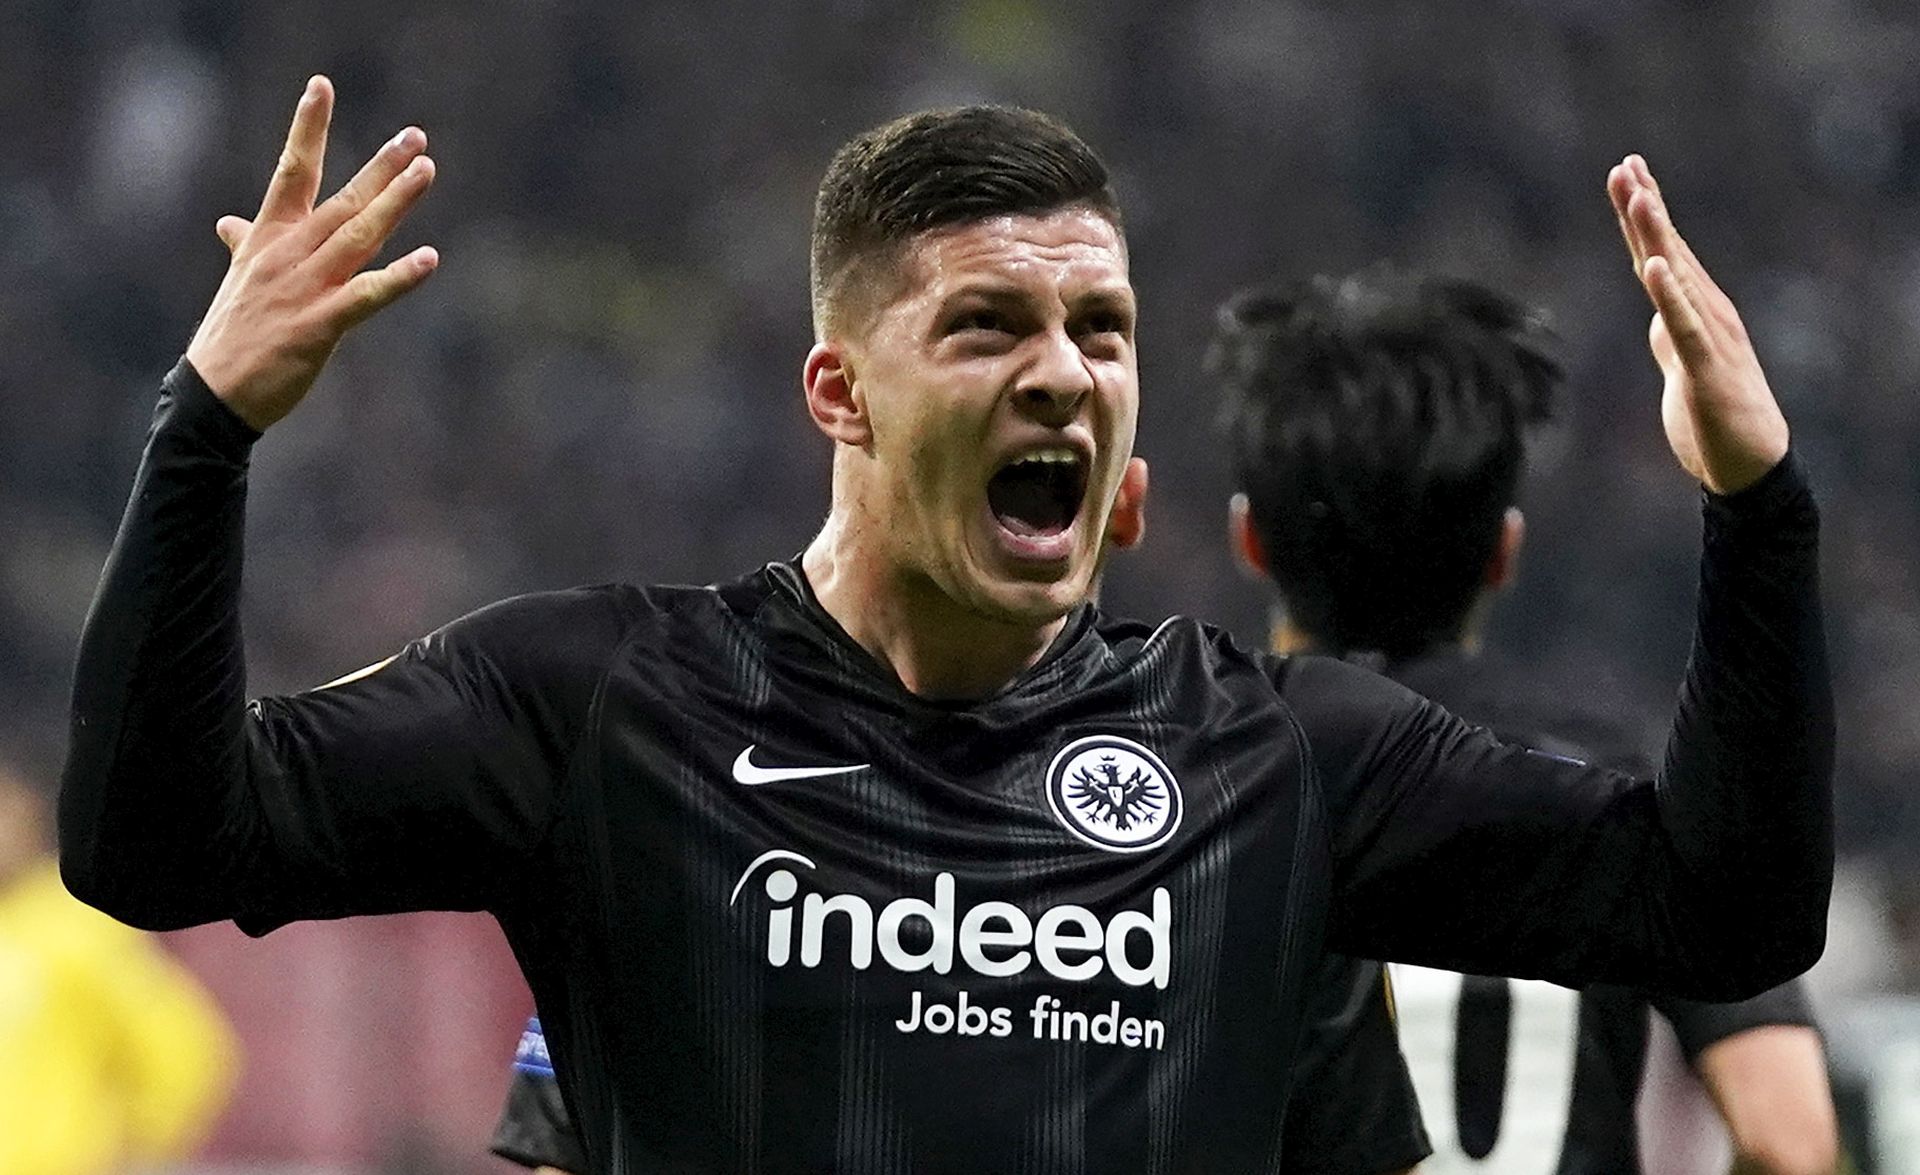 epa07624398 (FILE) - Frankfurt's Luka Jovic celebrates after scoring the opening goal during the UEFA Europa League semi final, first leg soccer match between Eintracht Frankfurt and Chelsea FC in Frankfurt, Germany, 02 May 2019 (re-issued 04 June 2019). Serbian forward Luka Jovic joins Spanish La Liga side Real Madrid for a transfer fee of reported 70 million euro, the German Bundesliga soccer club Eintracht Frankfurt confirmed on 04 June 2019. Jovic signed a six-year contract with Real Madrid.  EPA/RONALD WITTEK *** Local Caption *** 55164094